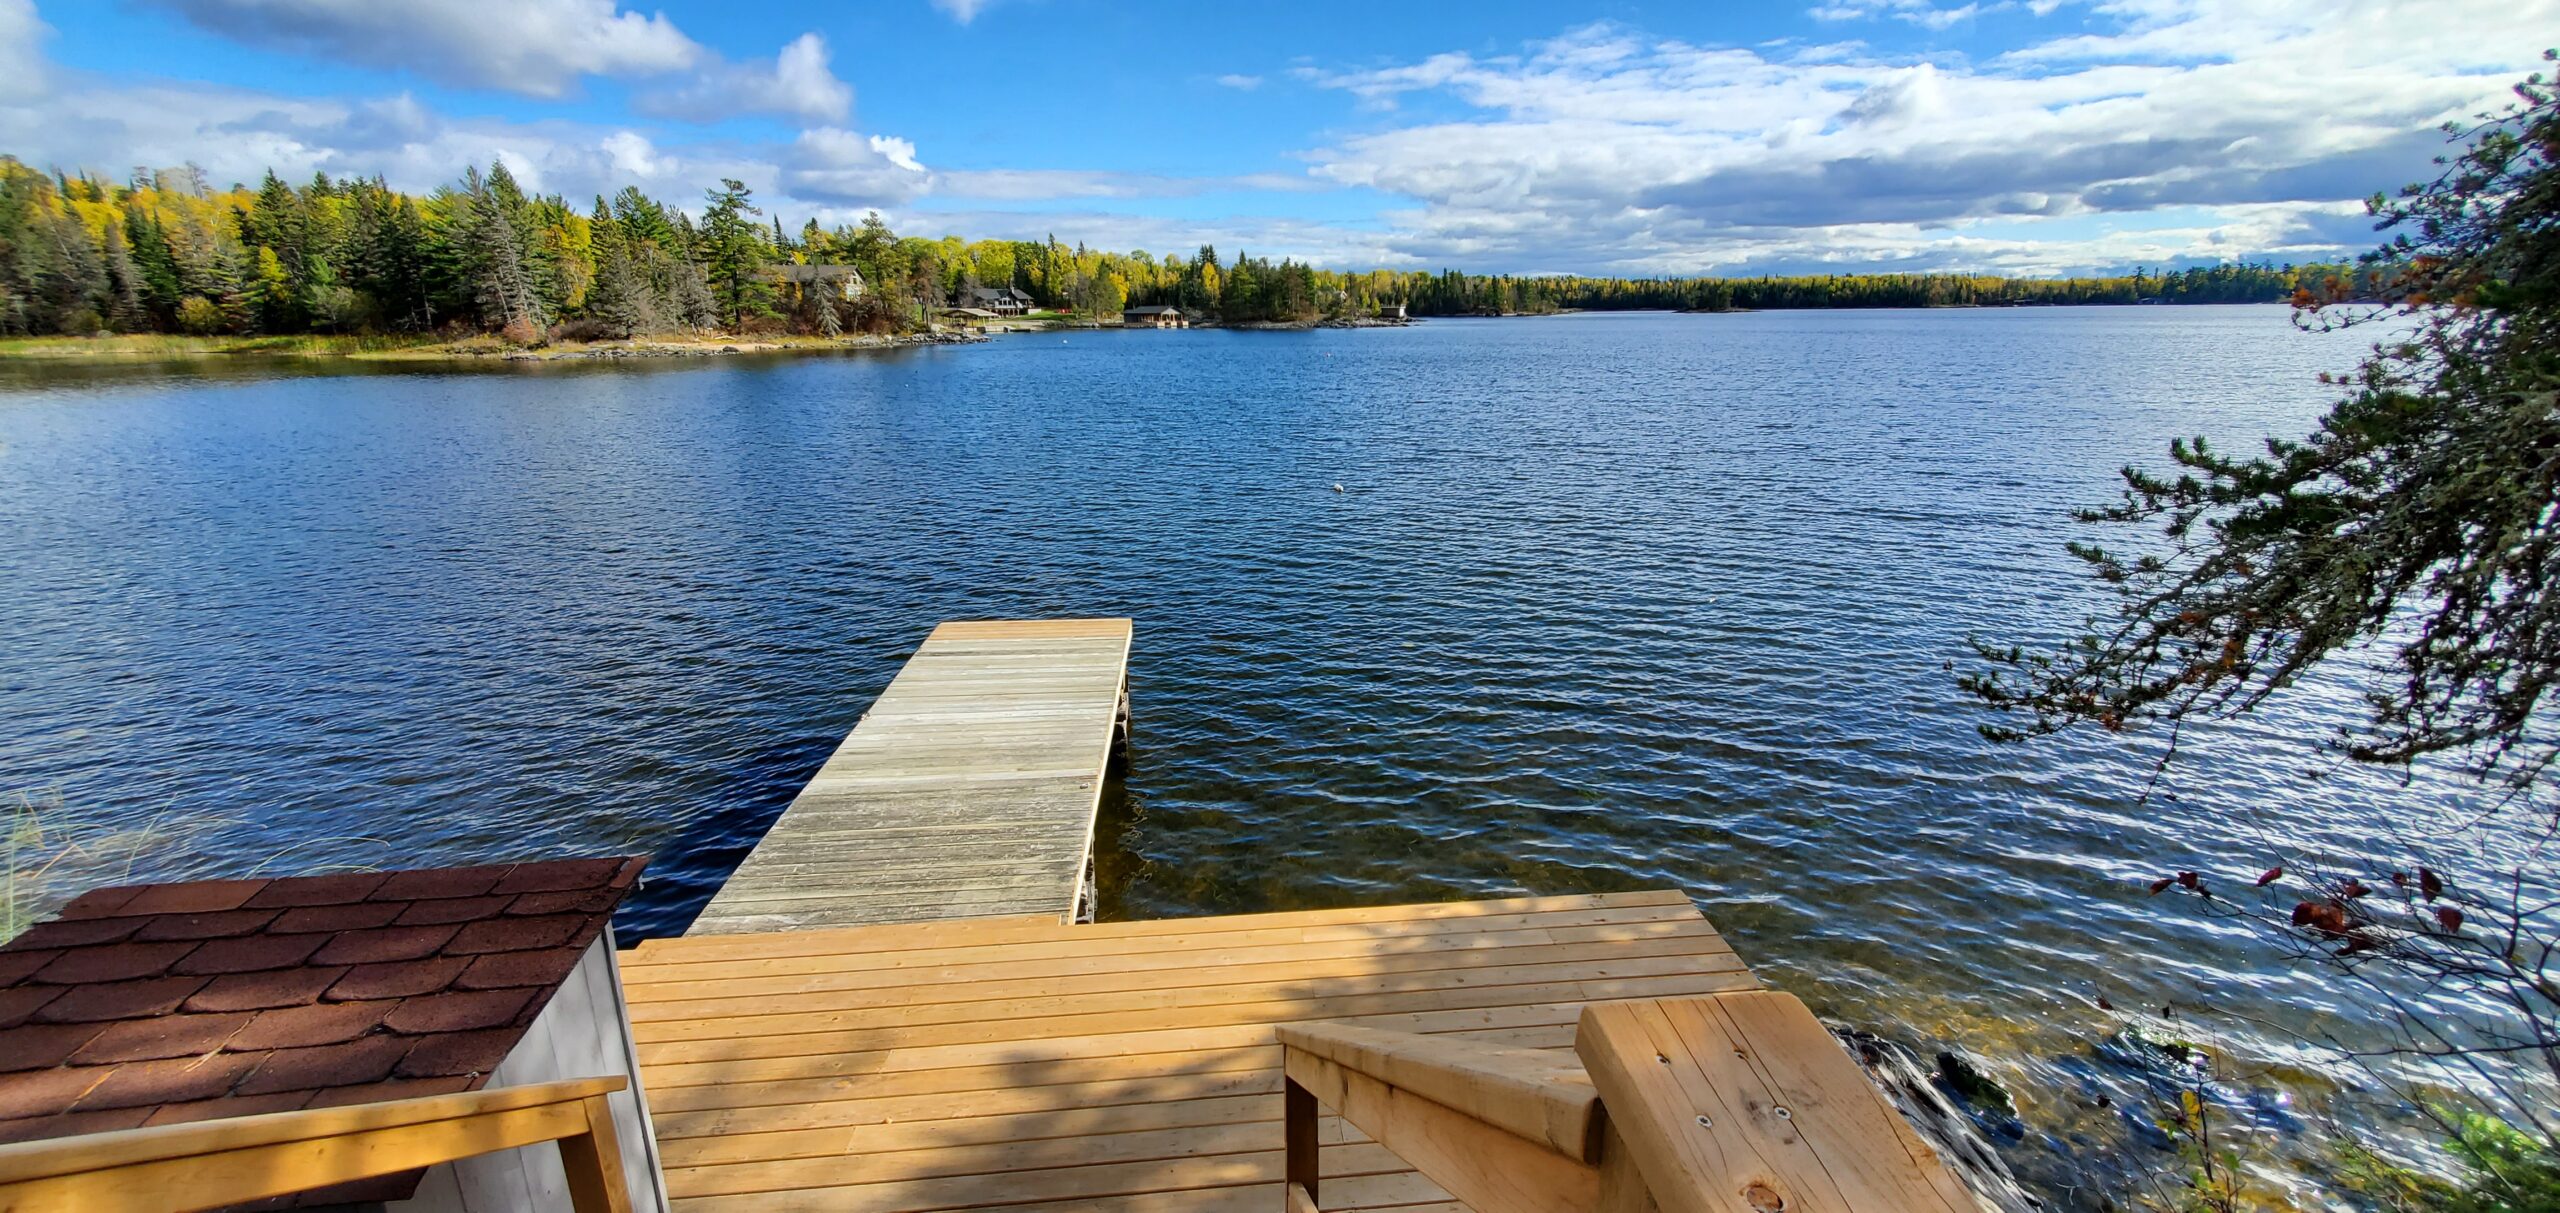 A wooden dock extends out from a big deck into a blue lake.